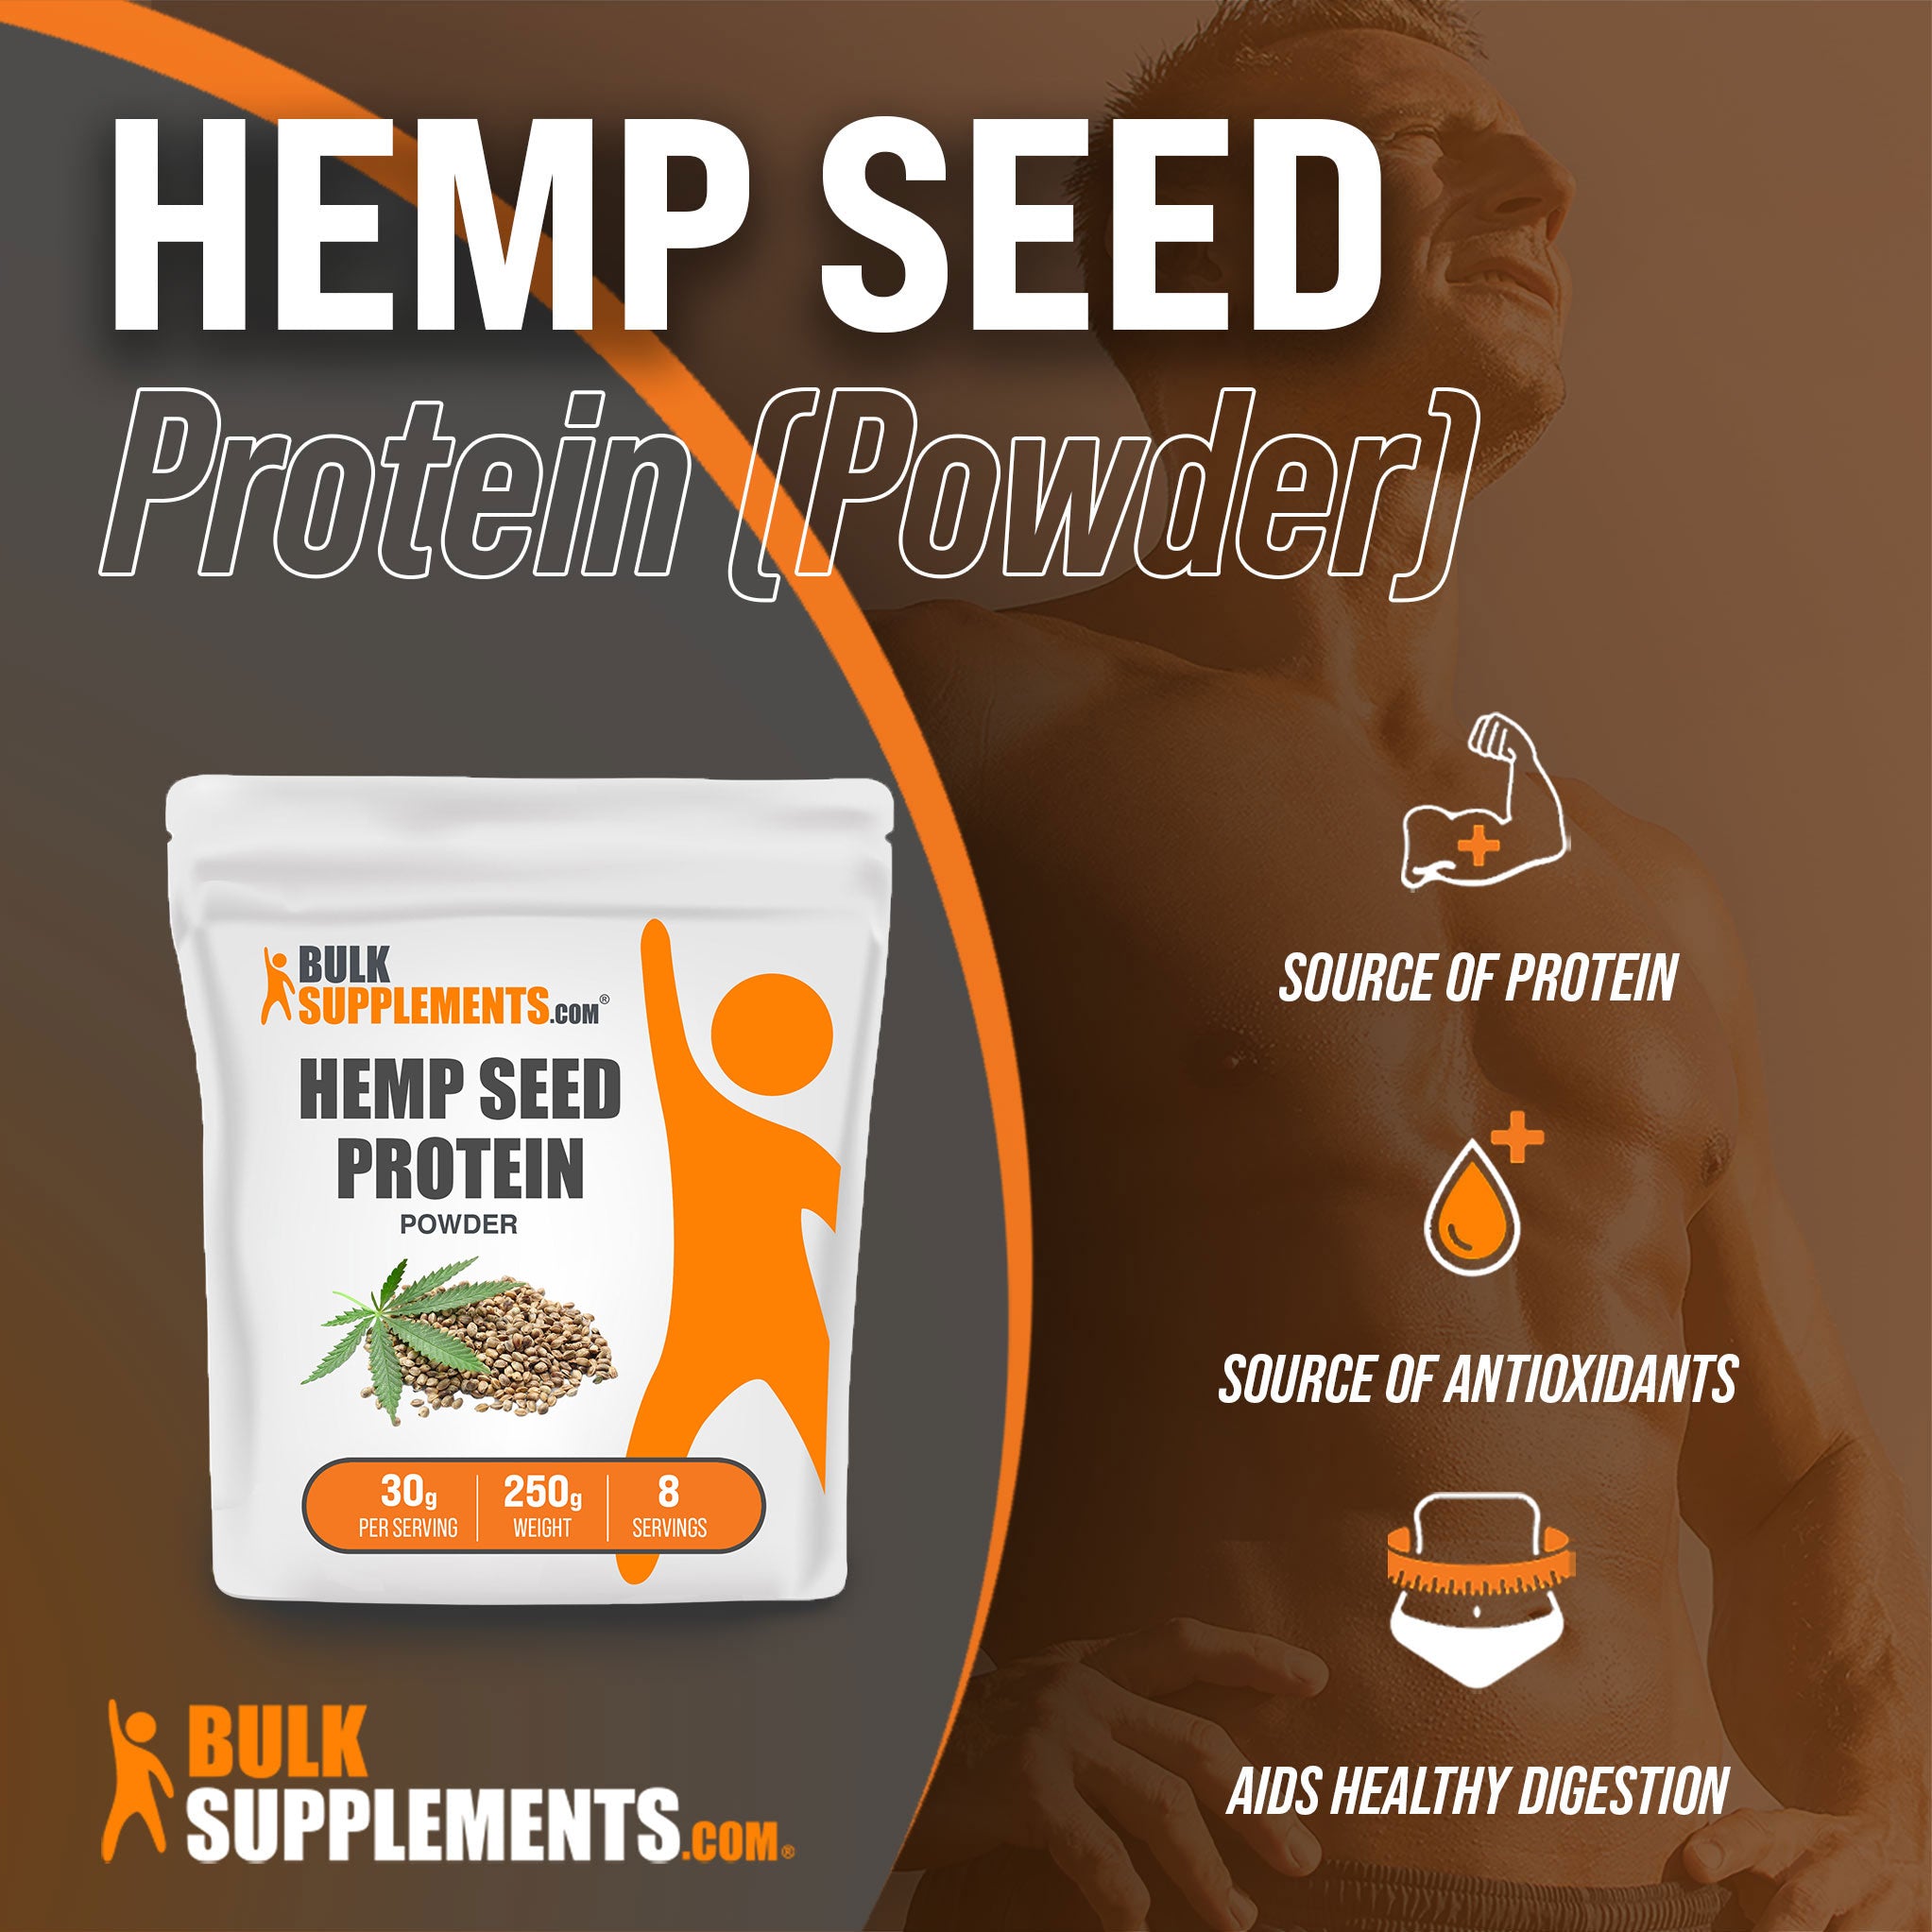 Benefits of Hemp Seed Protein Powder; source of protein, source of antioxidants, aids healthy digestion